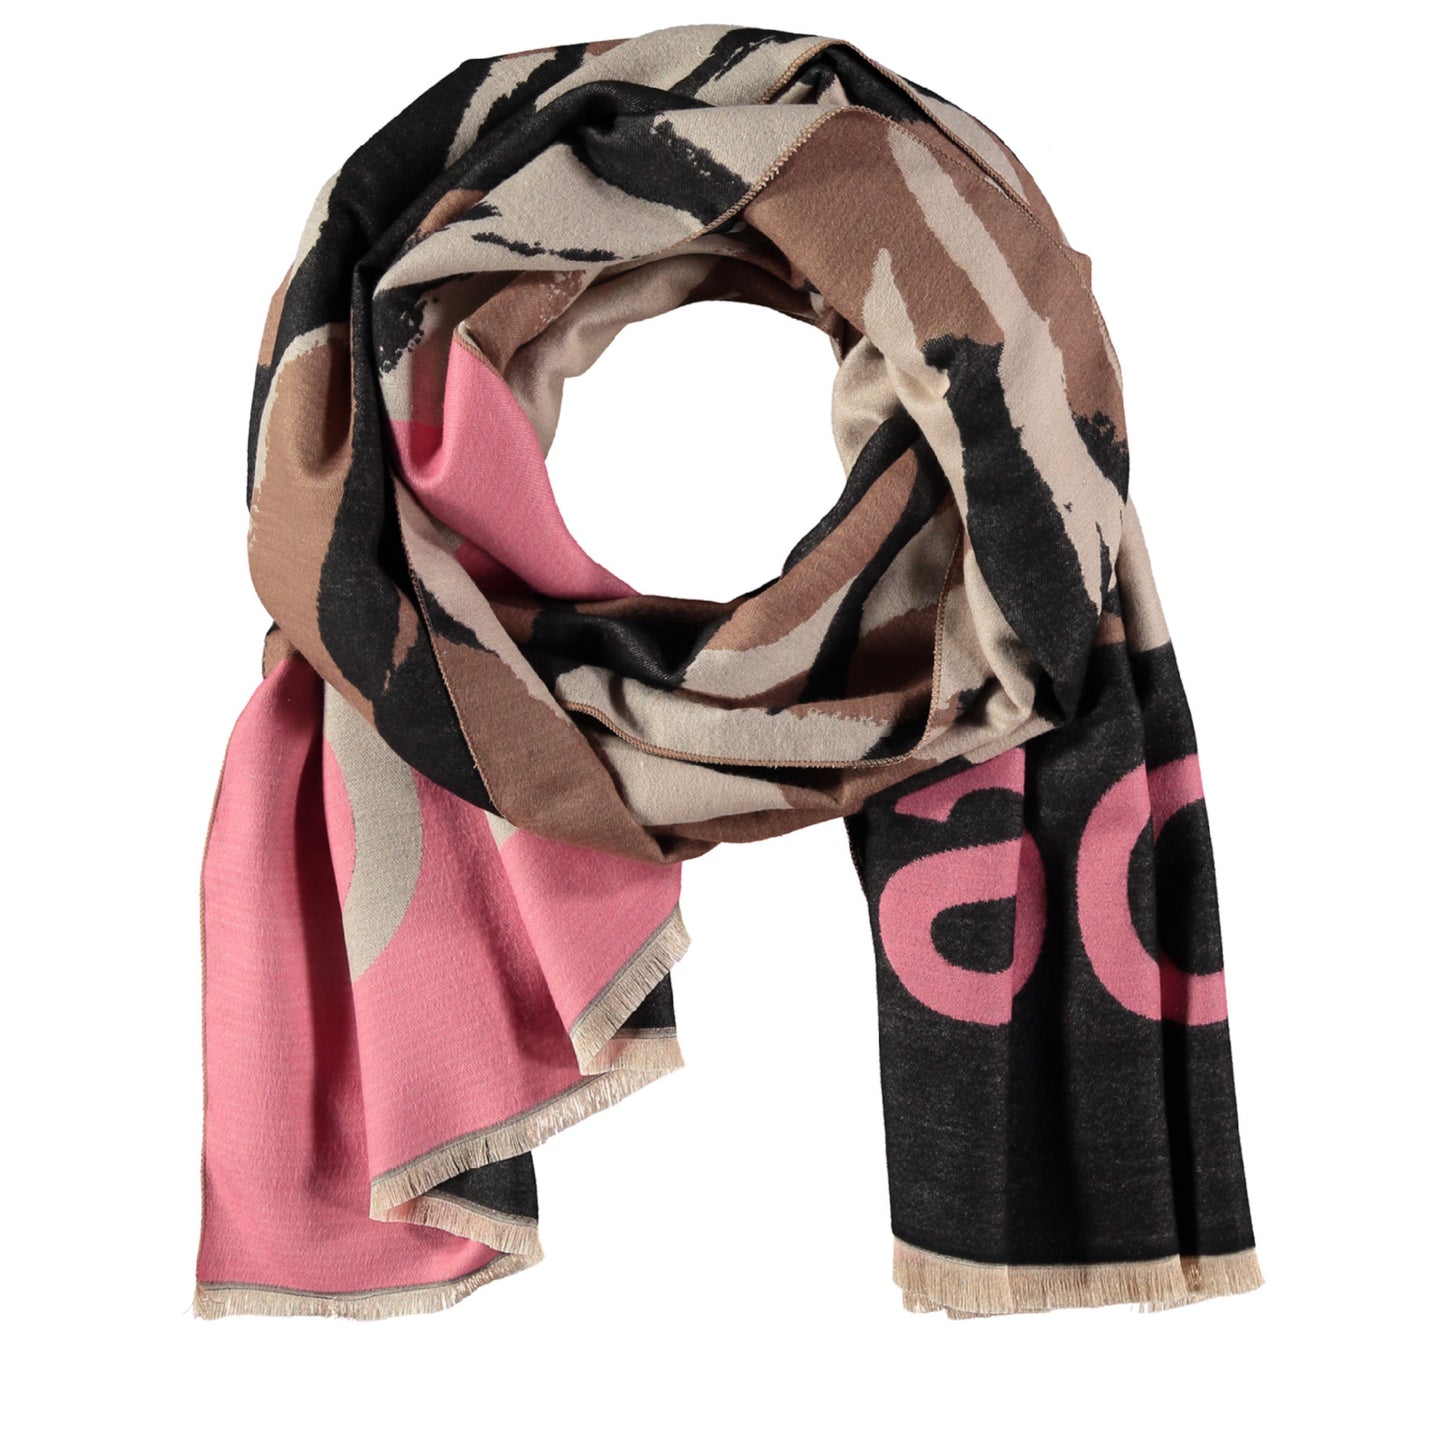 Taifun 400403 13303 3412 Frosted Rose Pattern Scarf